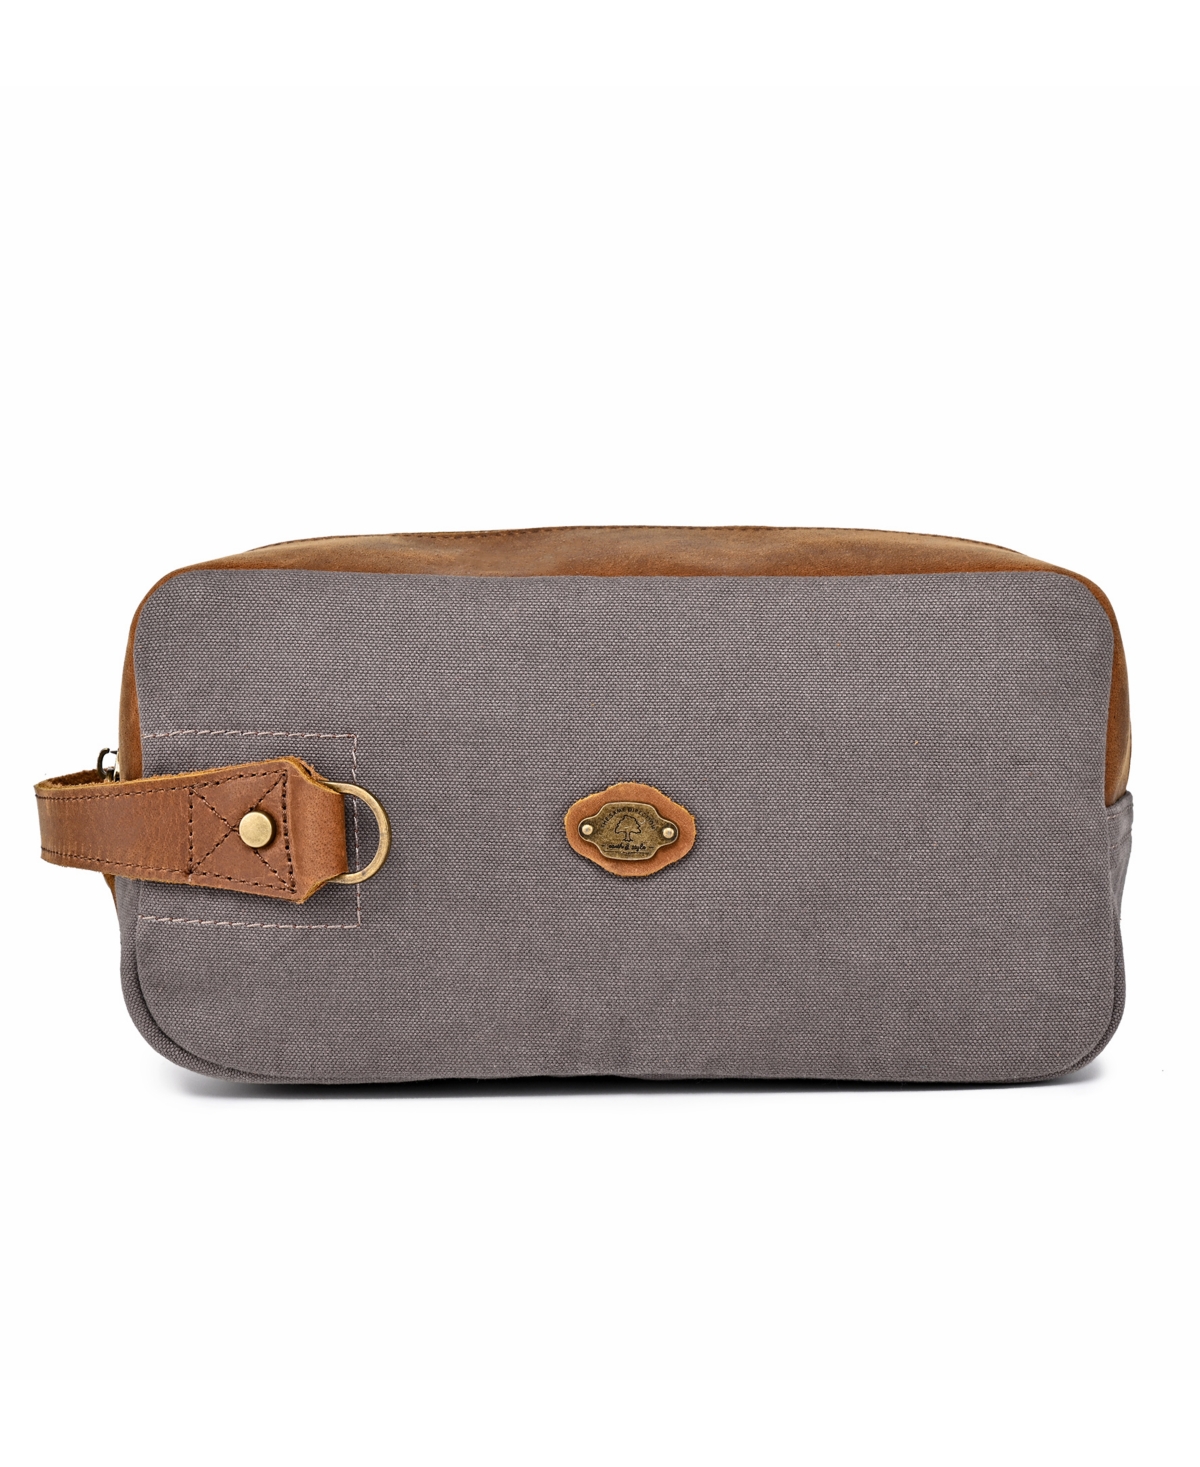 Valley Oak Canvas Toiletry Bag - Olive